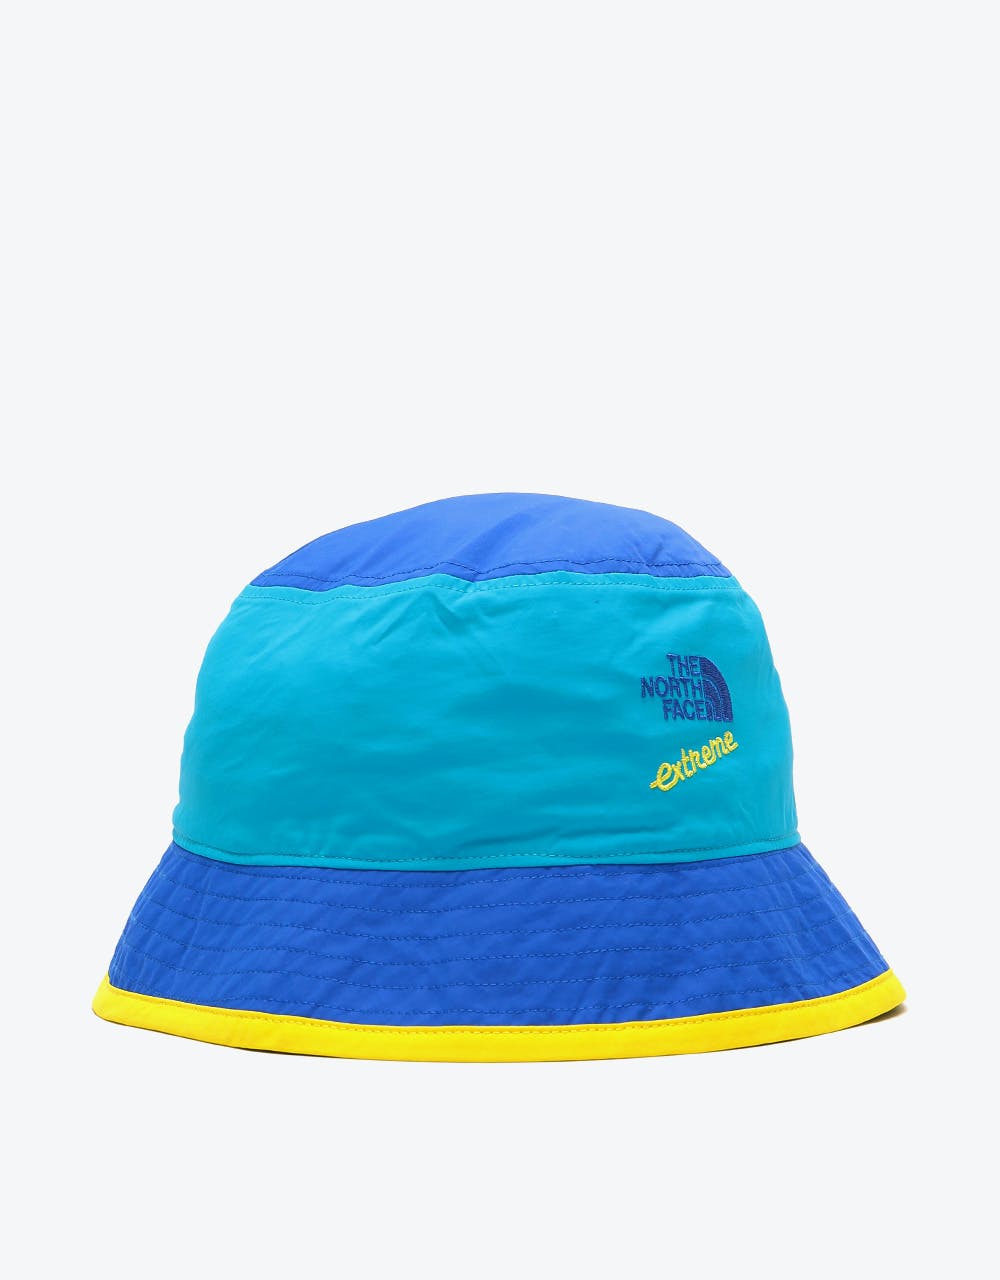 The North Face Cypress Bucket Hat - Meridian Blue